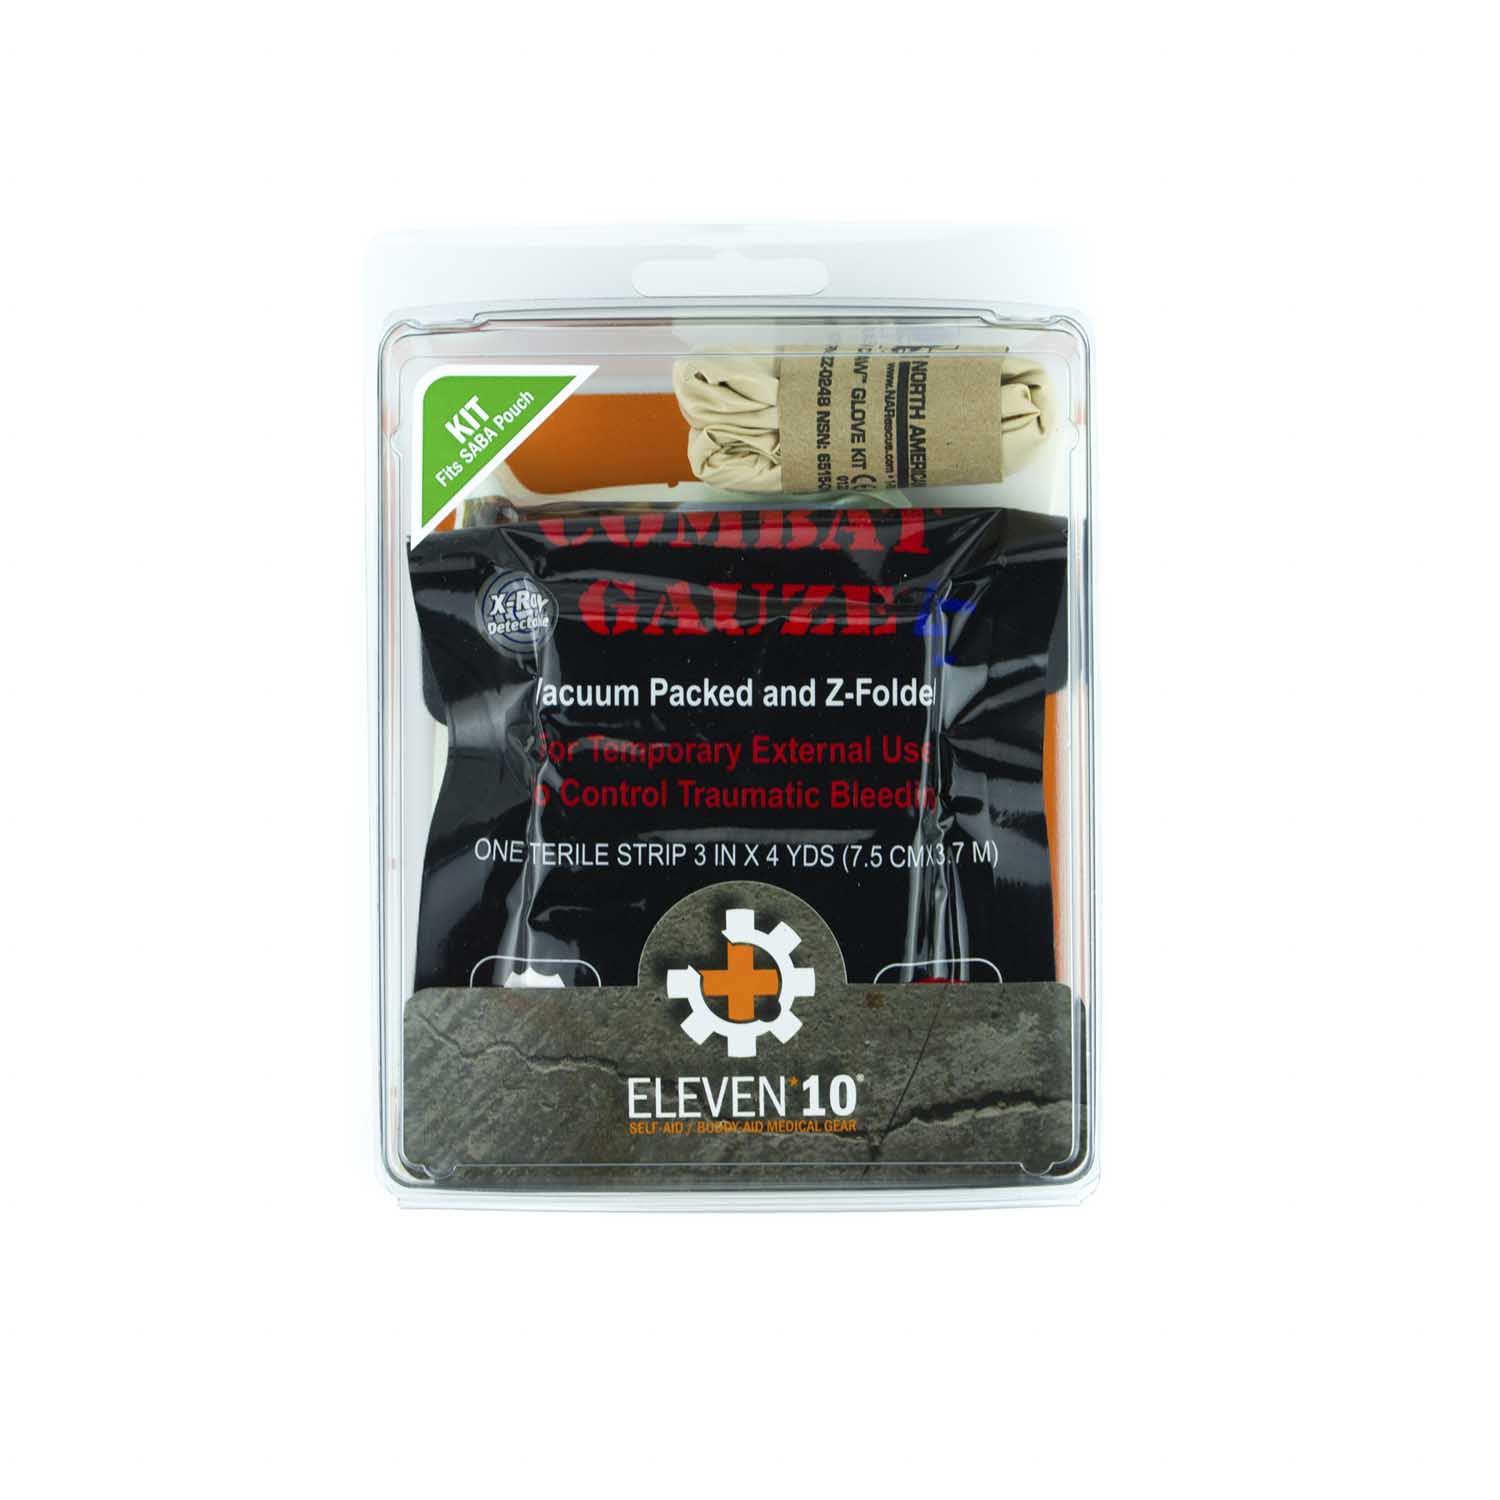 Eleven 10 SABA Replacement Kit with Combat Gauze